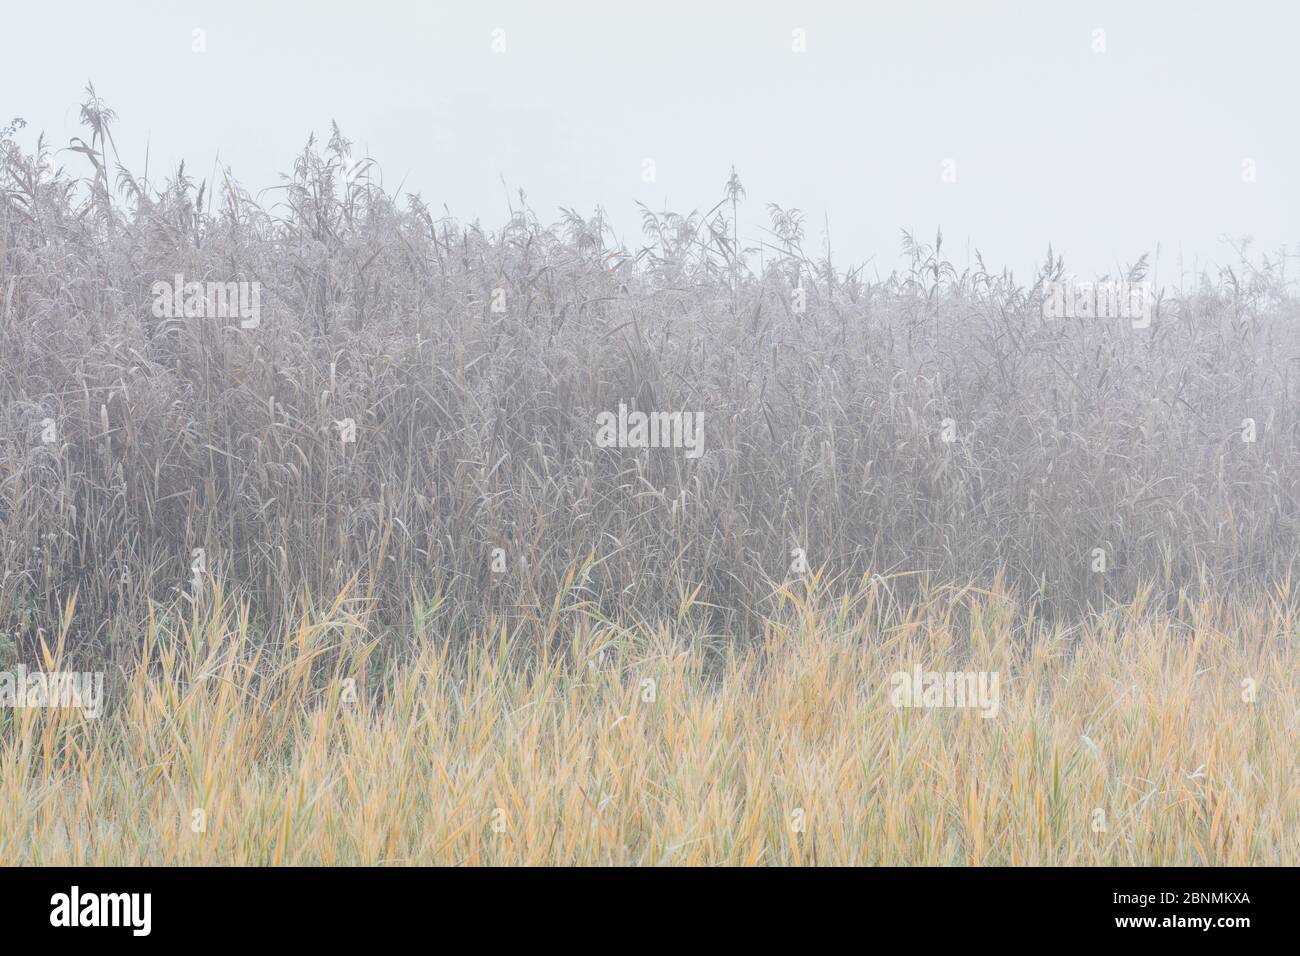 Common reed (Phragmites australis) with autumn colors coveredin frost, in fog, Germany, November 2015. Stock Photo